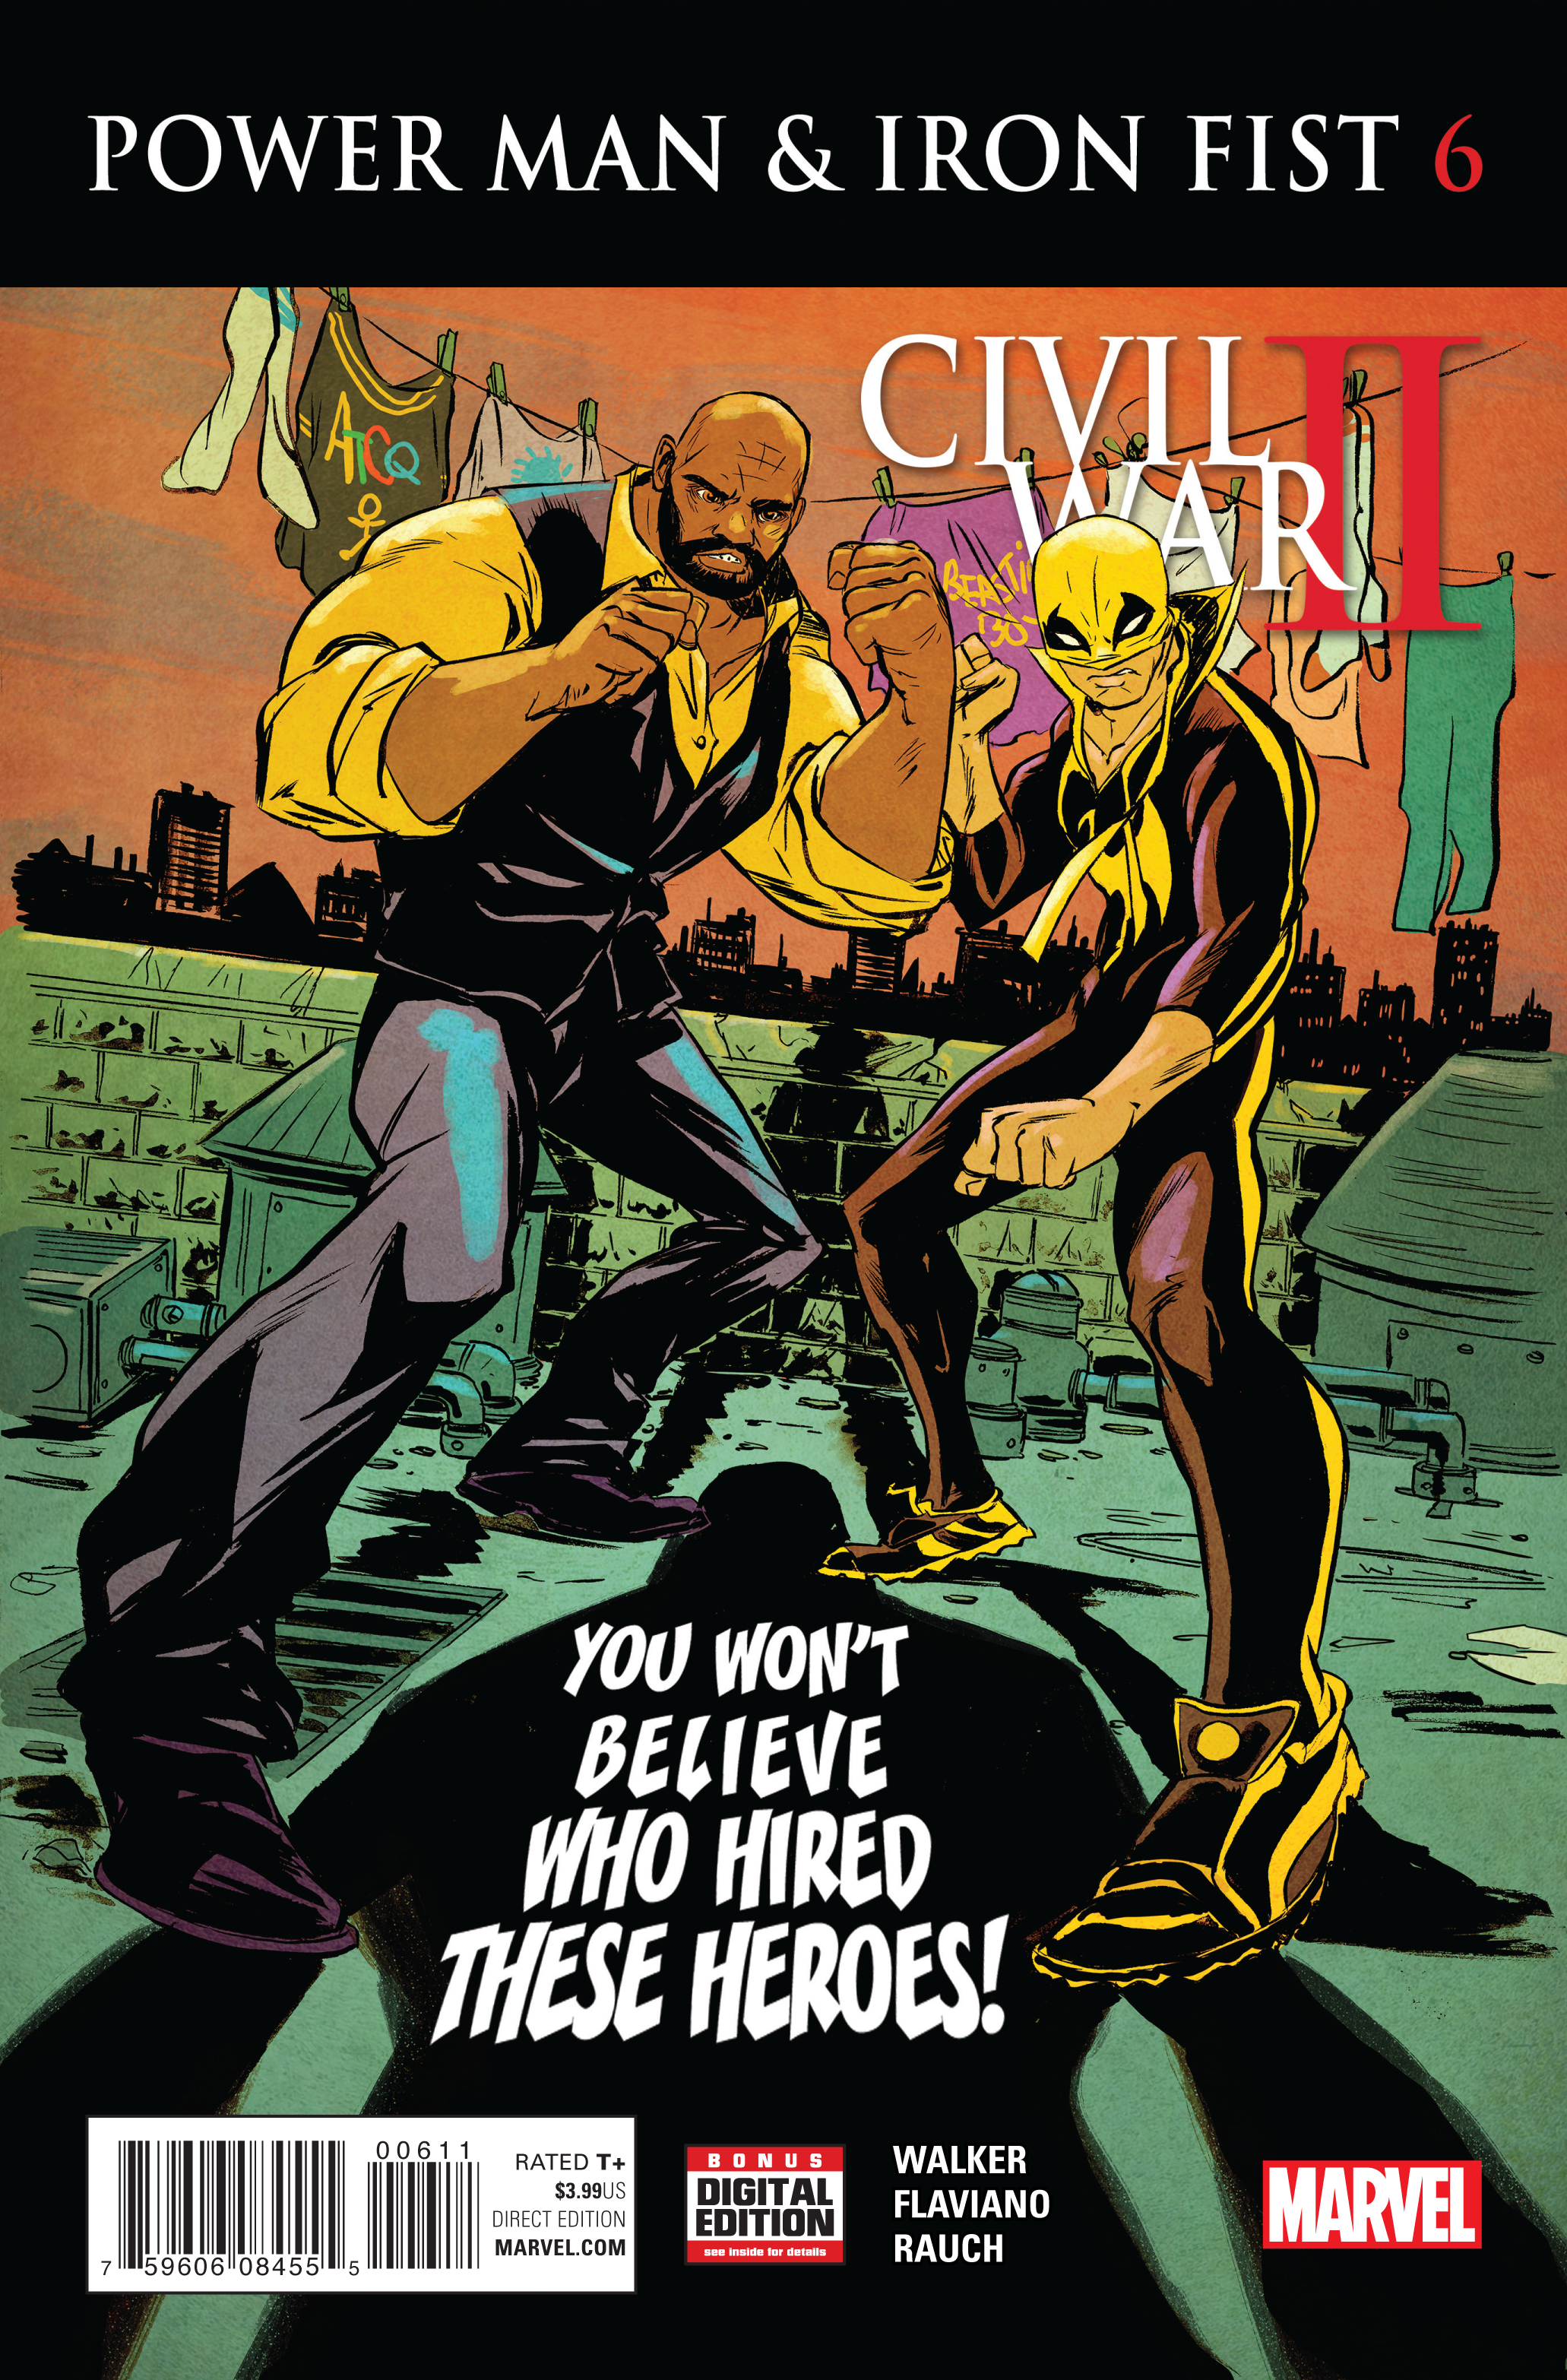 POWER MAN AND IRON FIST #6 CW2